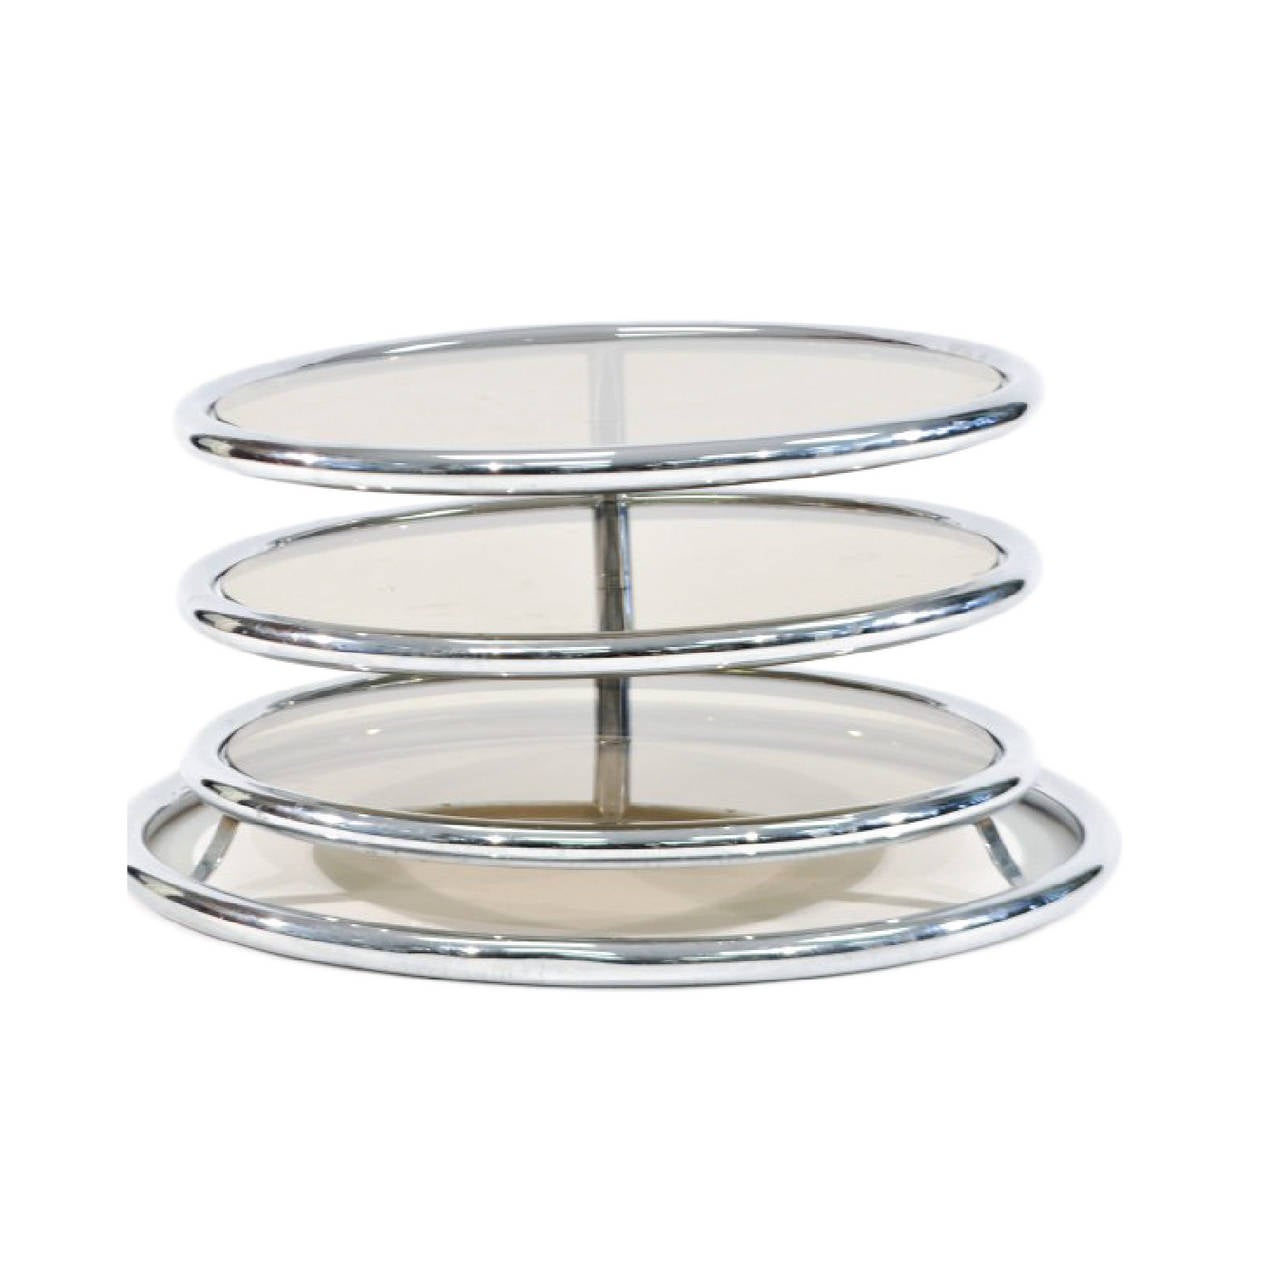 Three-tiered stackable coffee table from Italy. Extends and opens to expose three round table tops of smoked glass. Frame is made of chrome tubing.